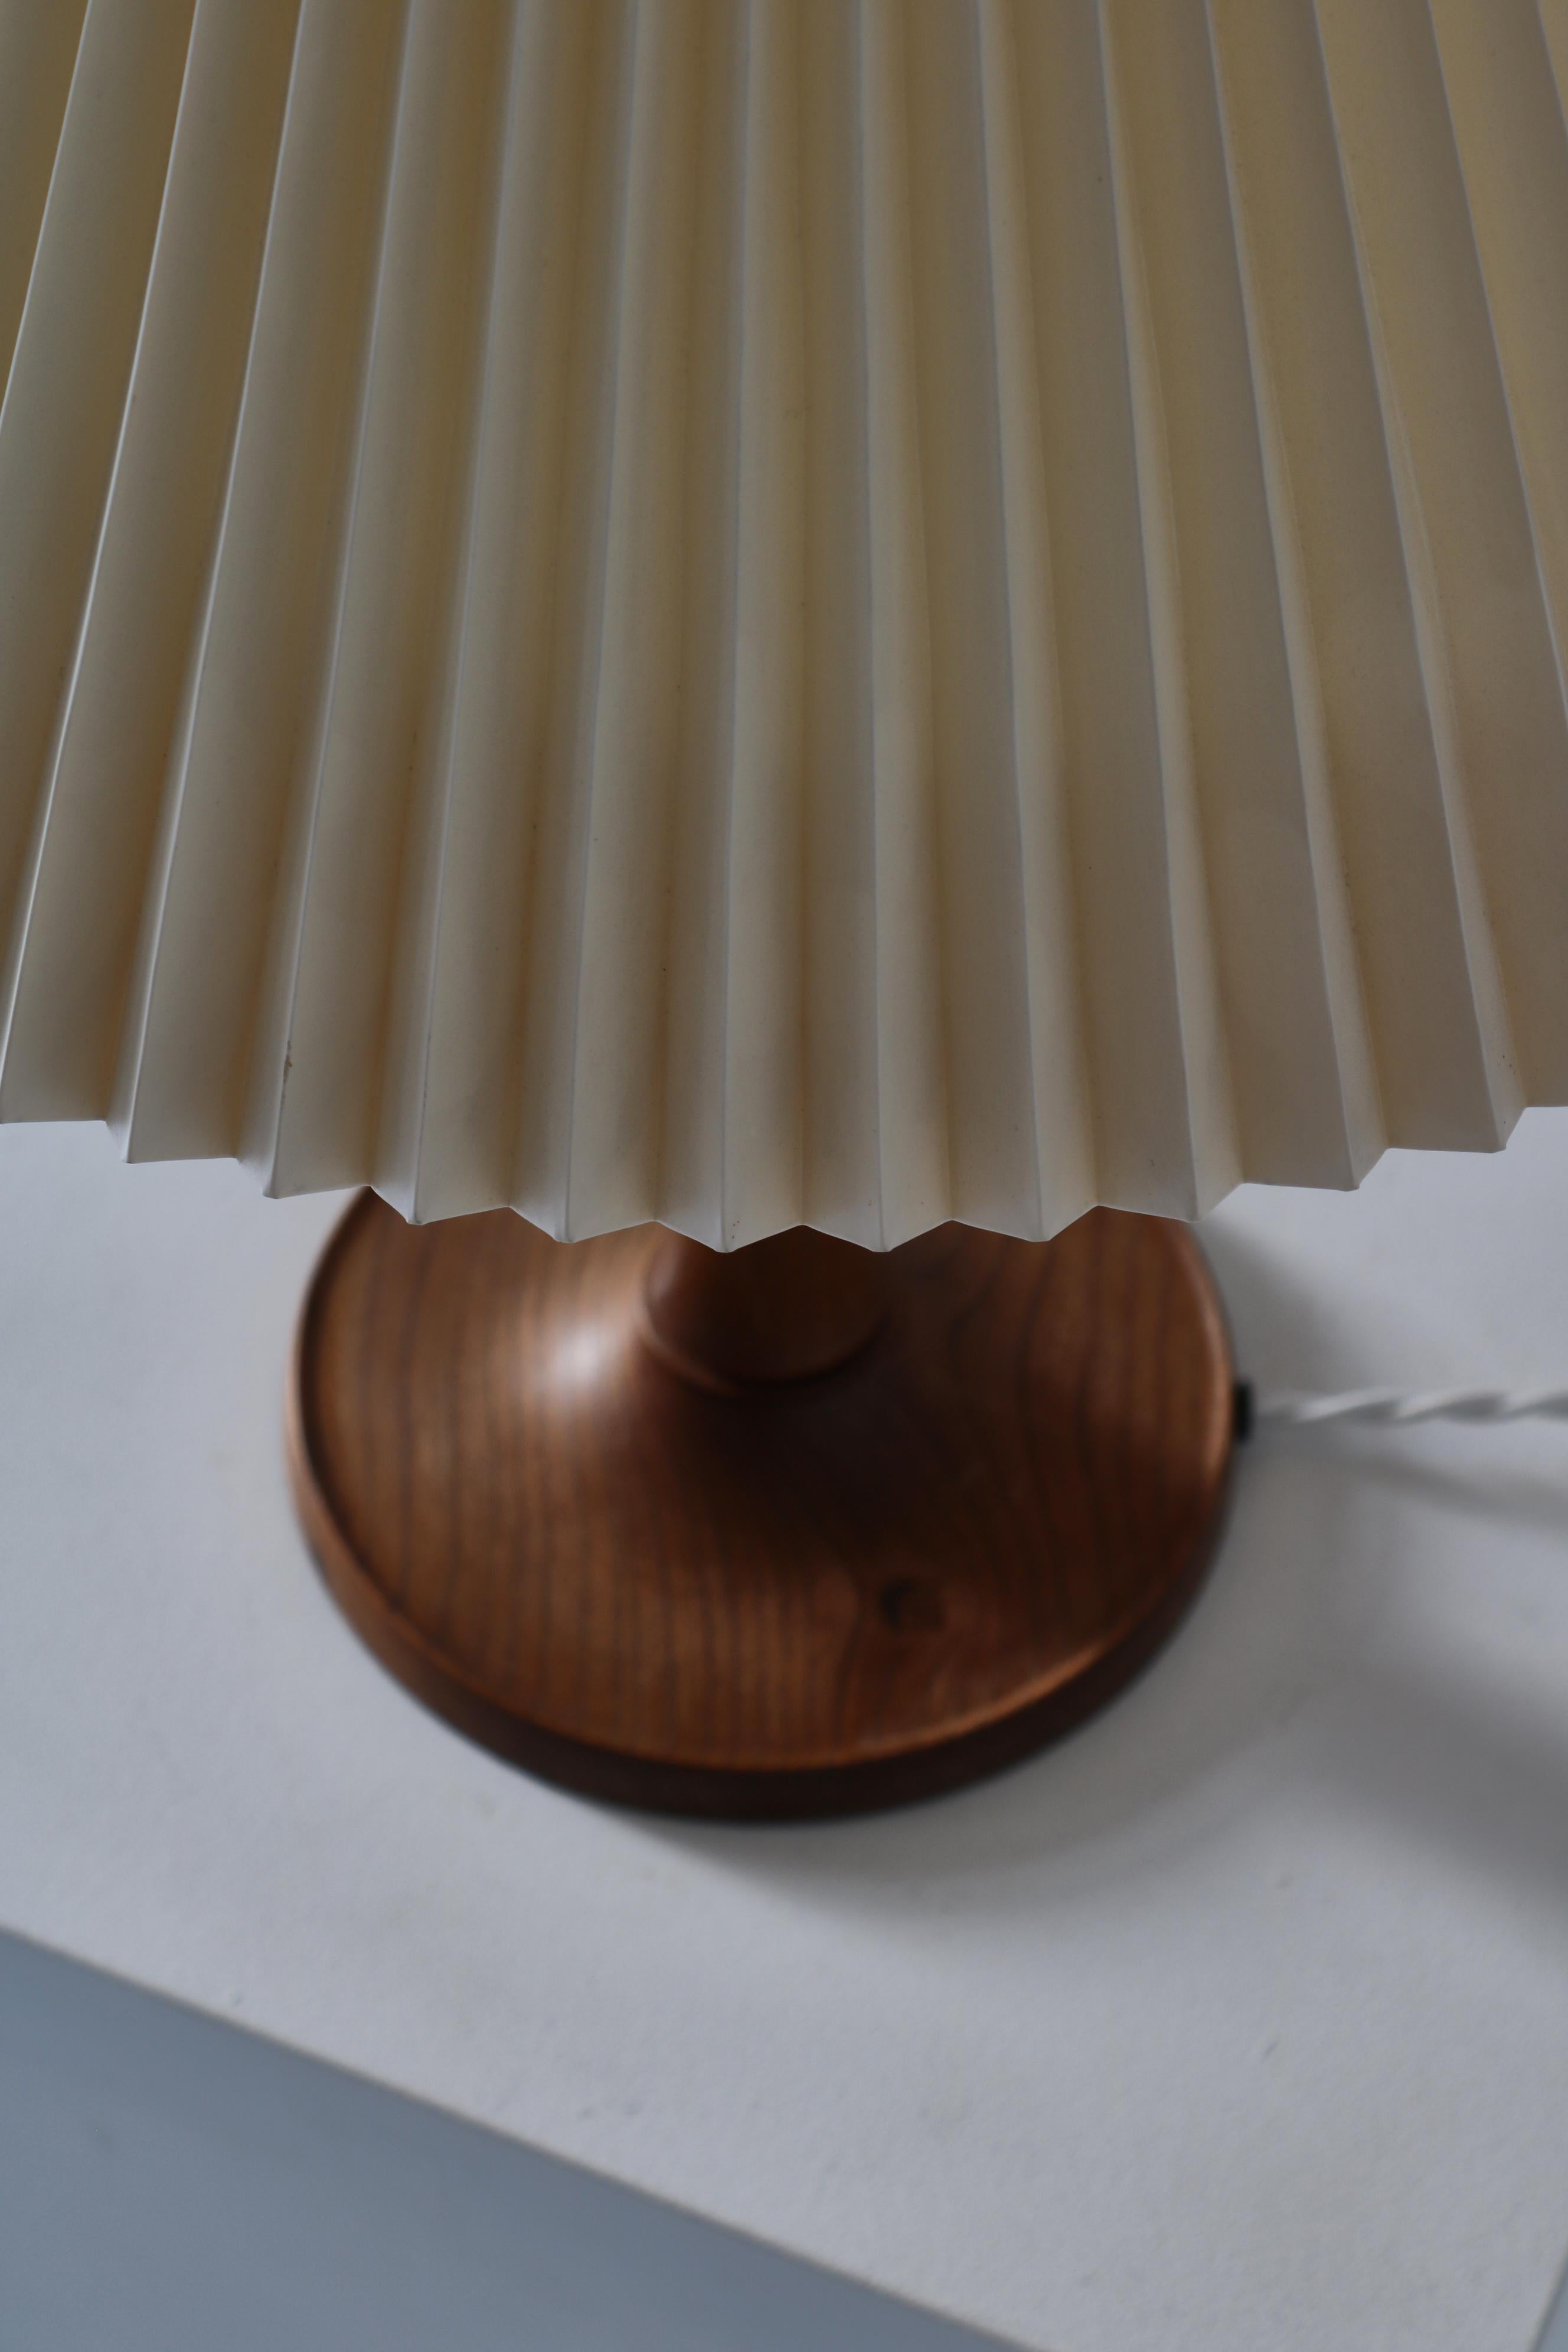 Kaare Klint Table Lamp in Ash Wood and Hand Folded Le Klint Shade, Denmark 1940s In Good Condition For Sale In Odense, DK